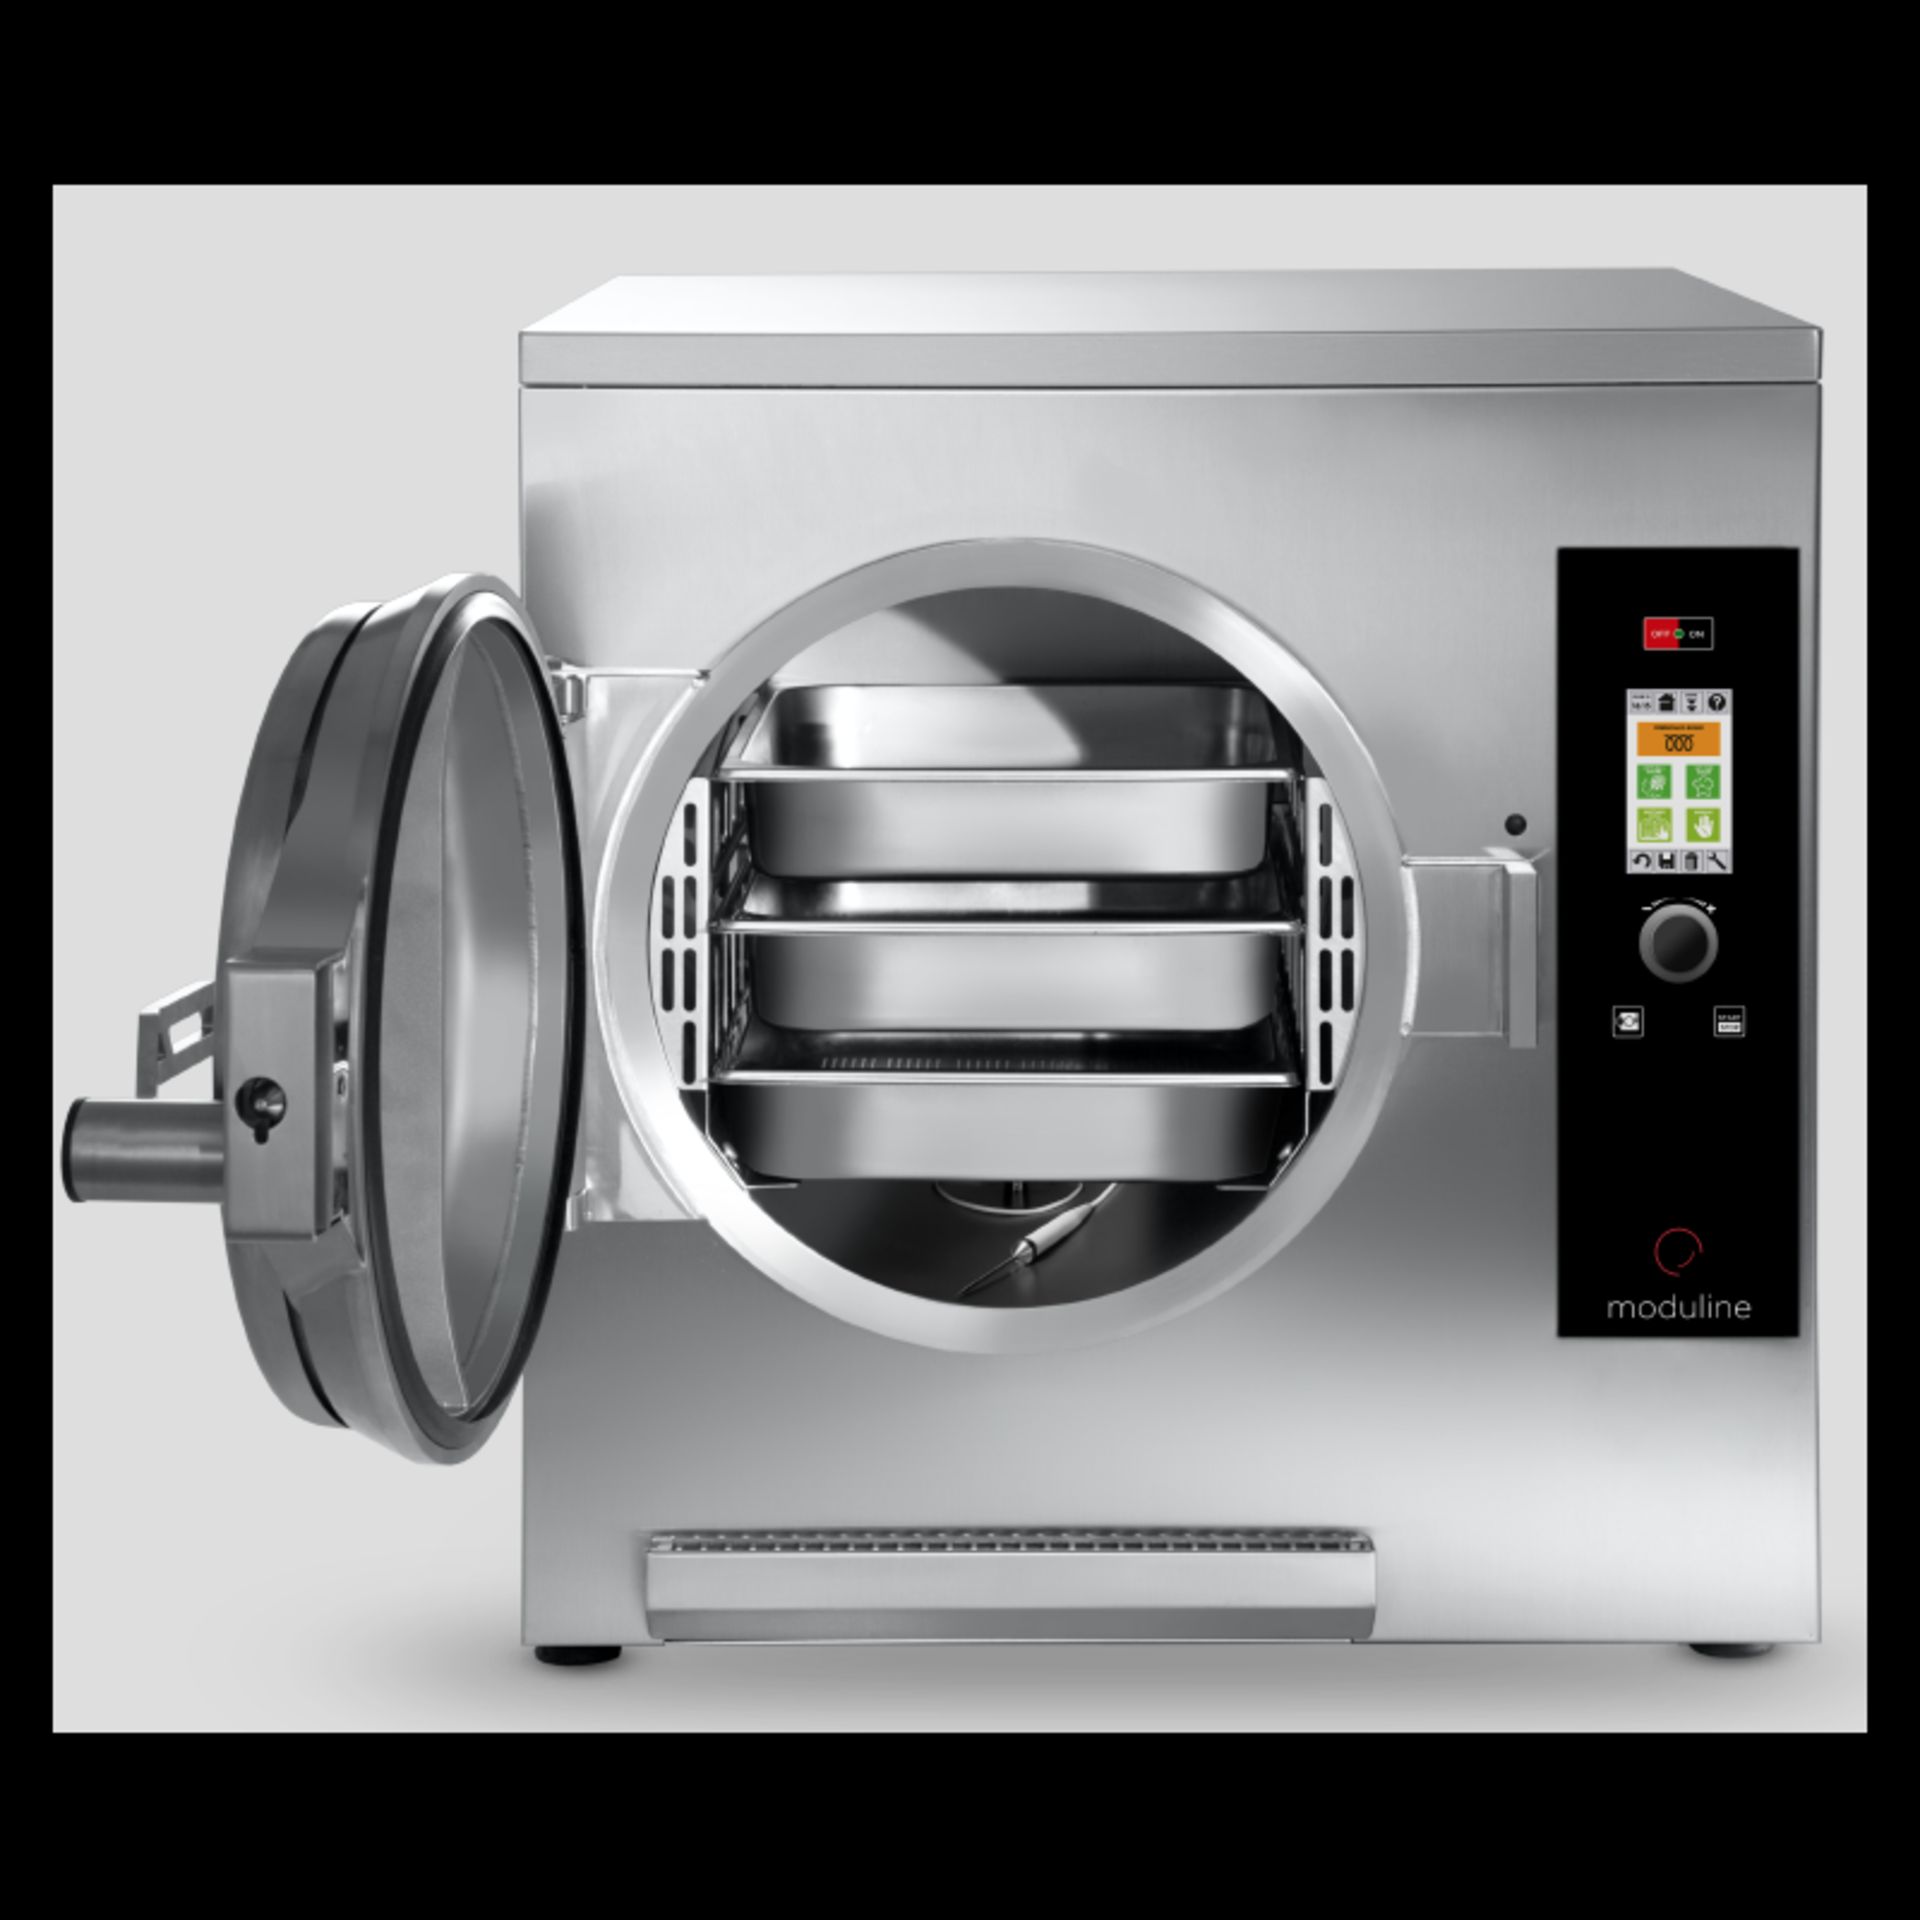 1 x Moduline Cook and Hold Convection Oven and Pressure Steamer Cooker - Features USB Connection, To - Image 8 of 16